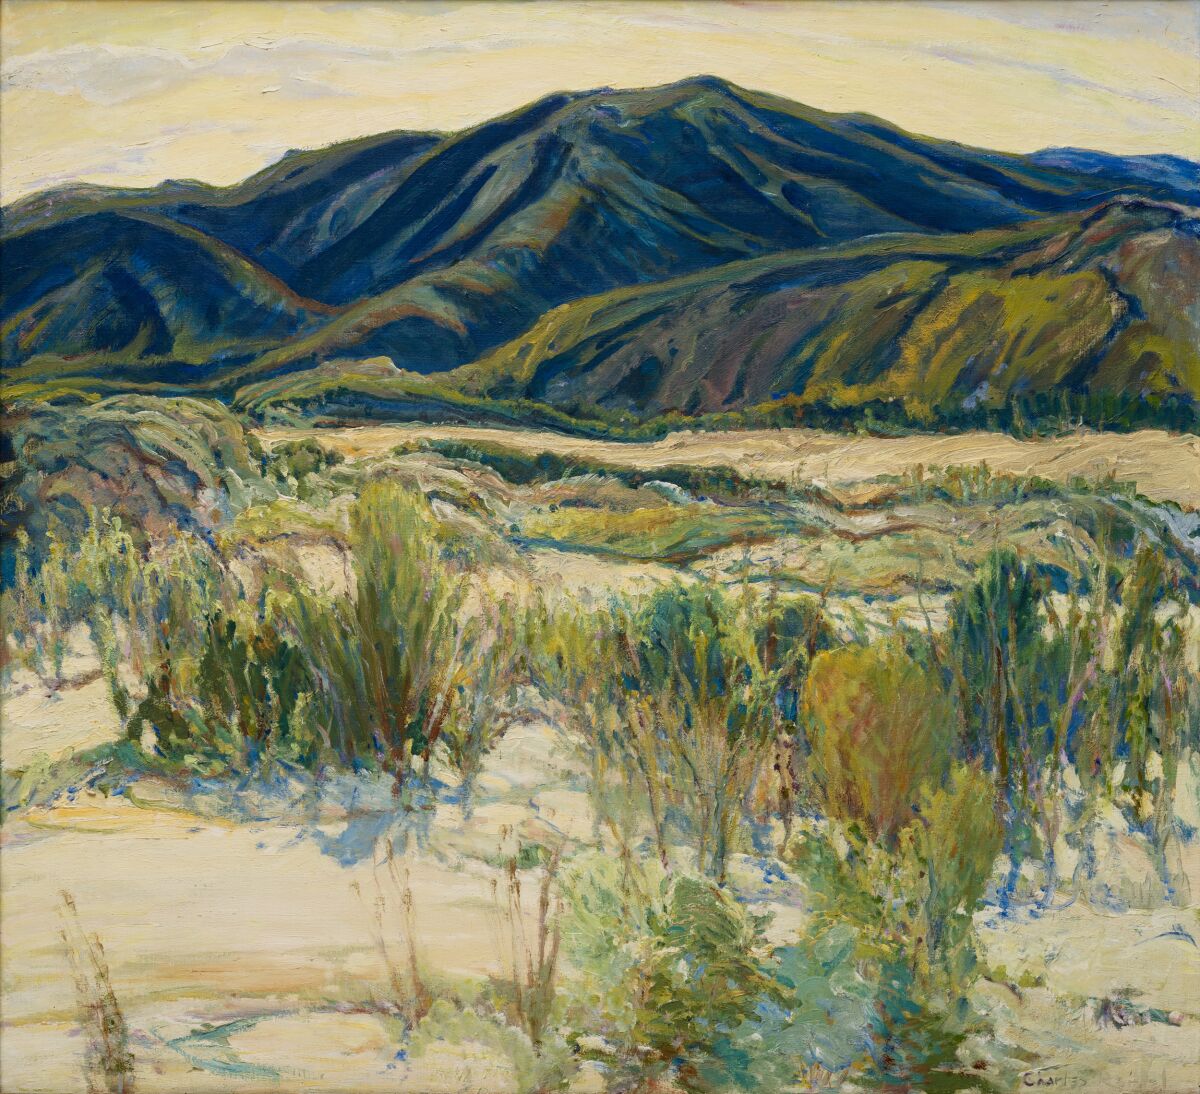 "In the Banner Valley" by Charles Reiffel (1926)